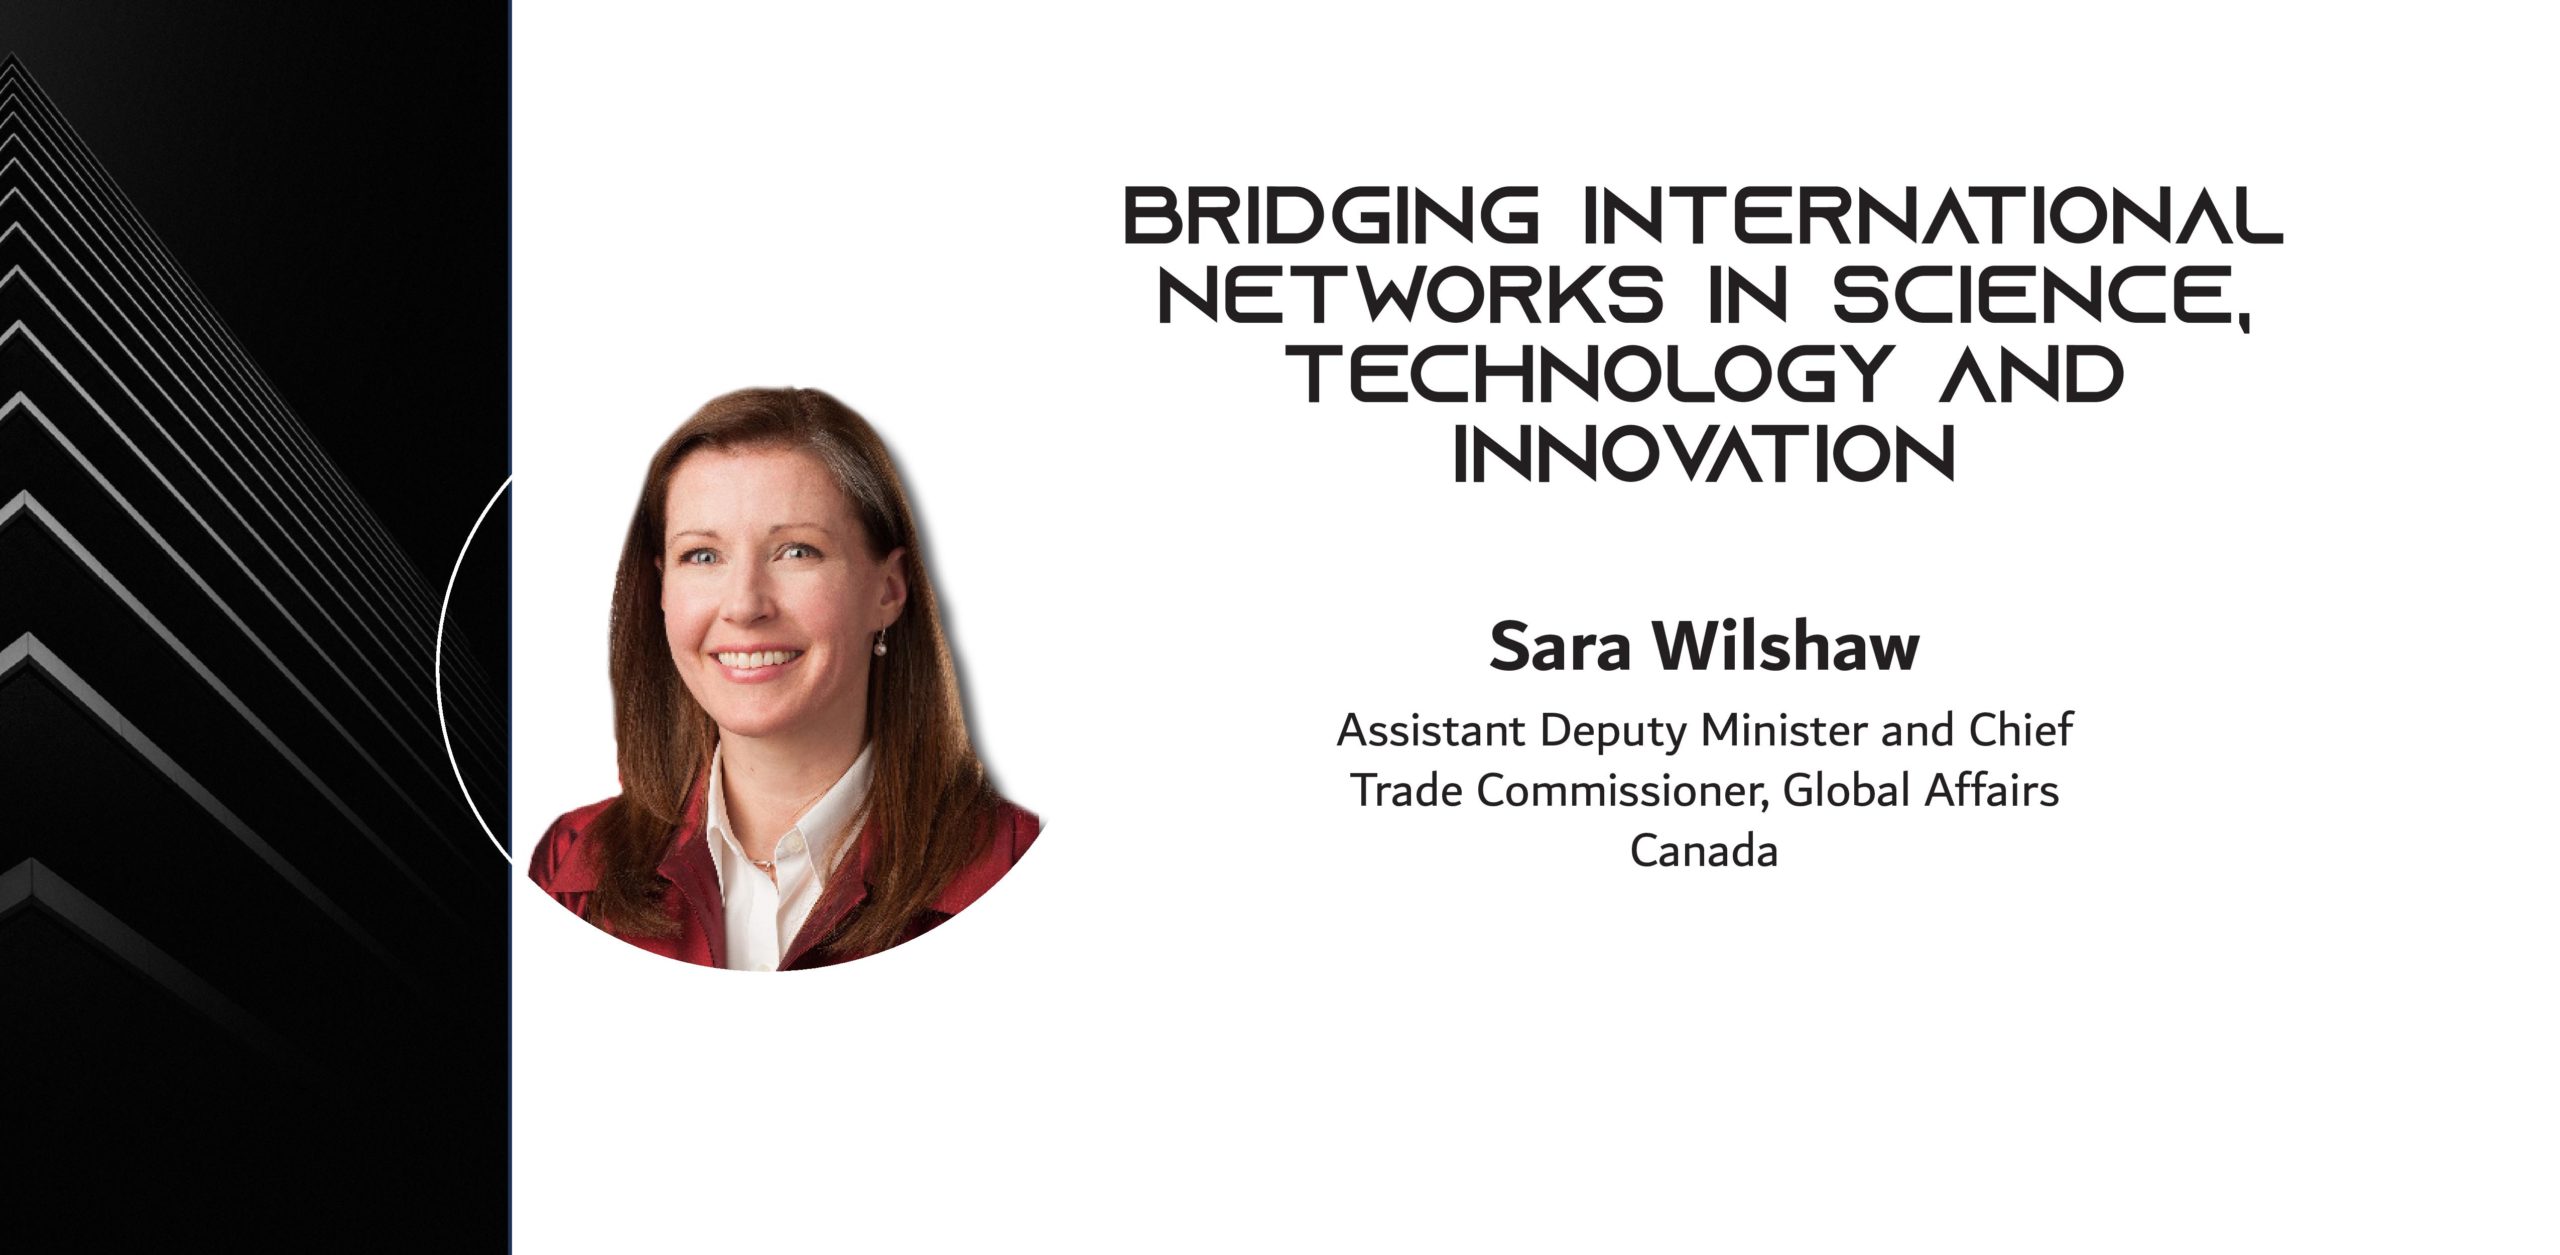 Photo of a woman wiht the words: BRIDGING INTERNATIONAL NETWORKS IN SCIENCE, TECHNOLOGY AND INNOVATION By Sara Wilshaw, Assistant Deputy Minister and Chief Trade Commissioner, Global Affairs Canada